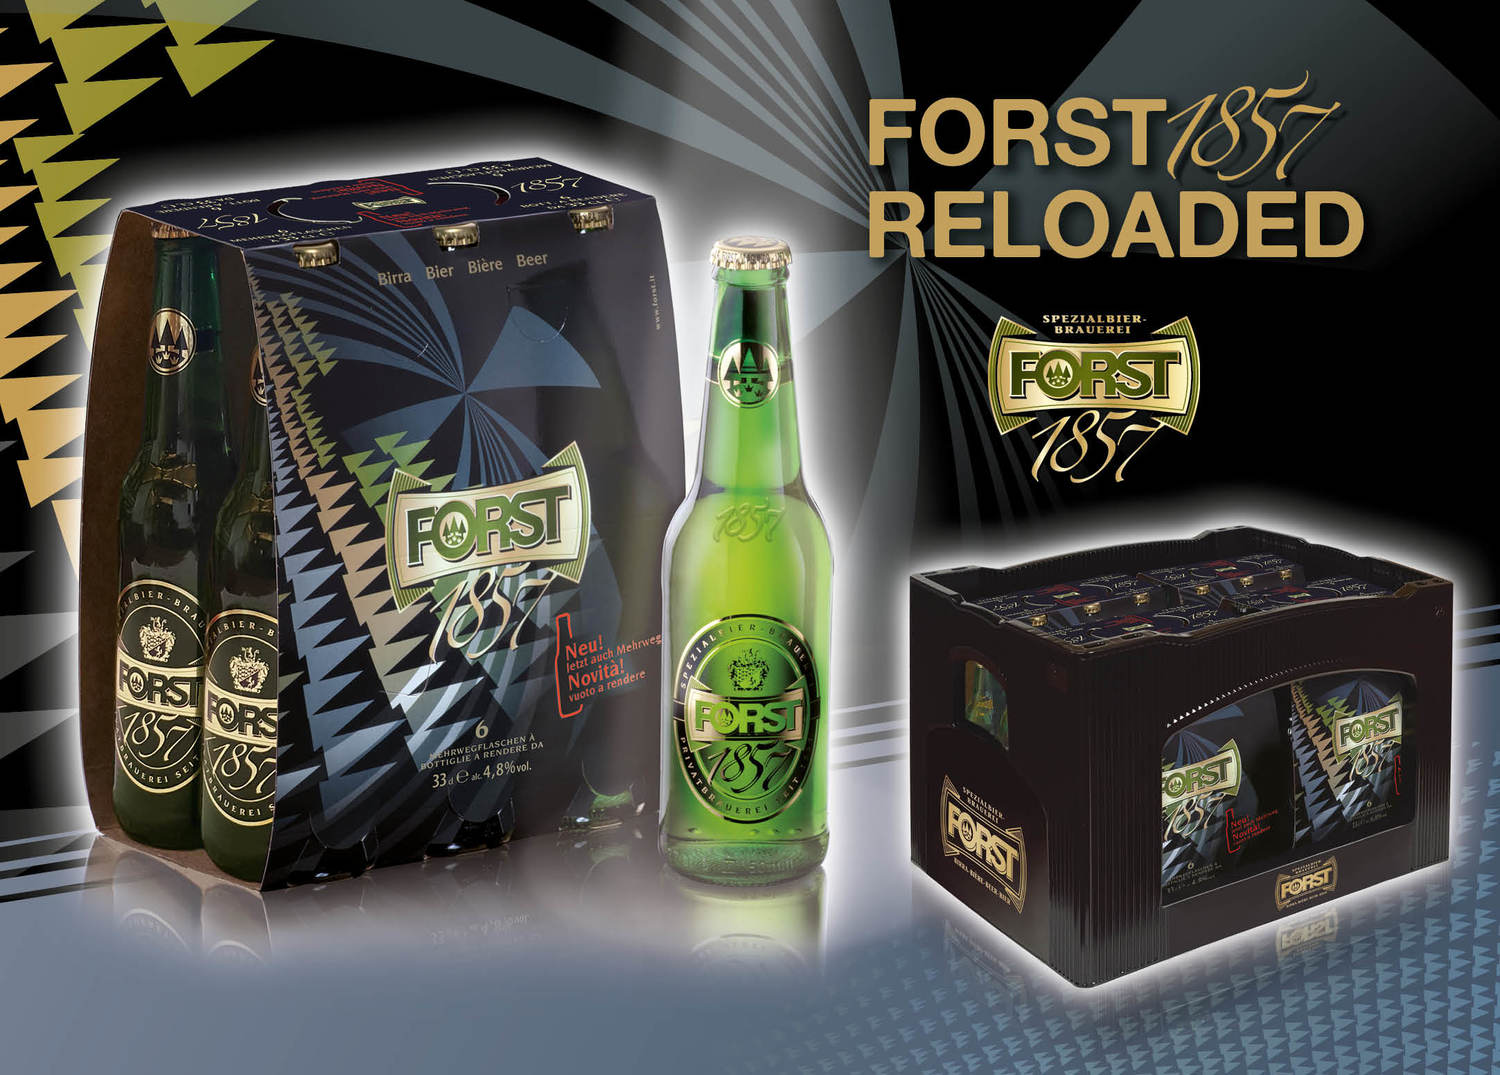 Forst 1857 Reloaded cambia look